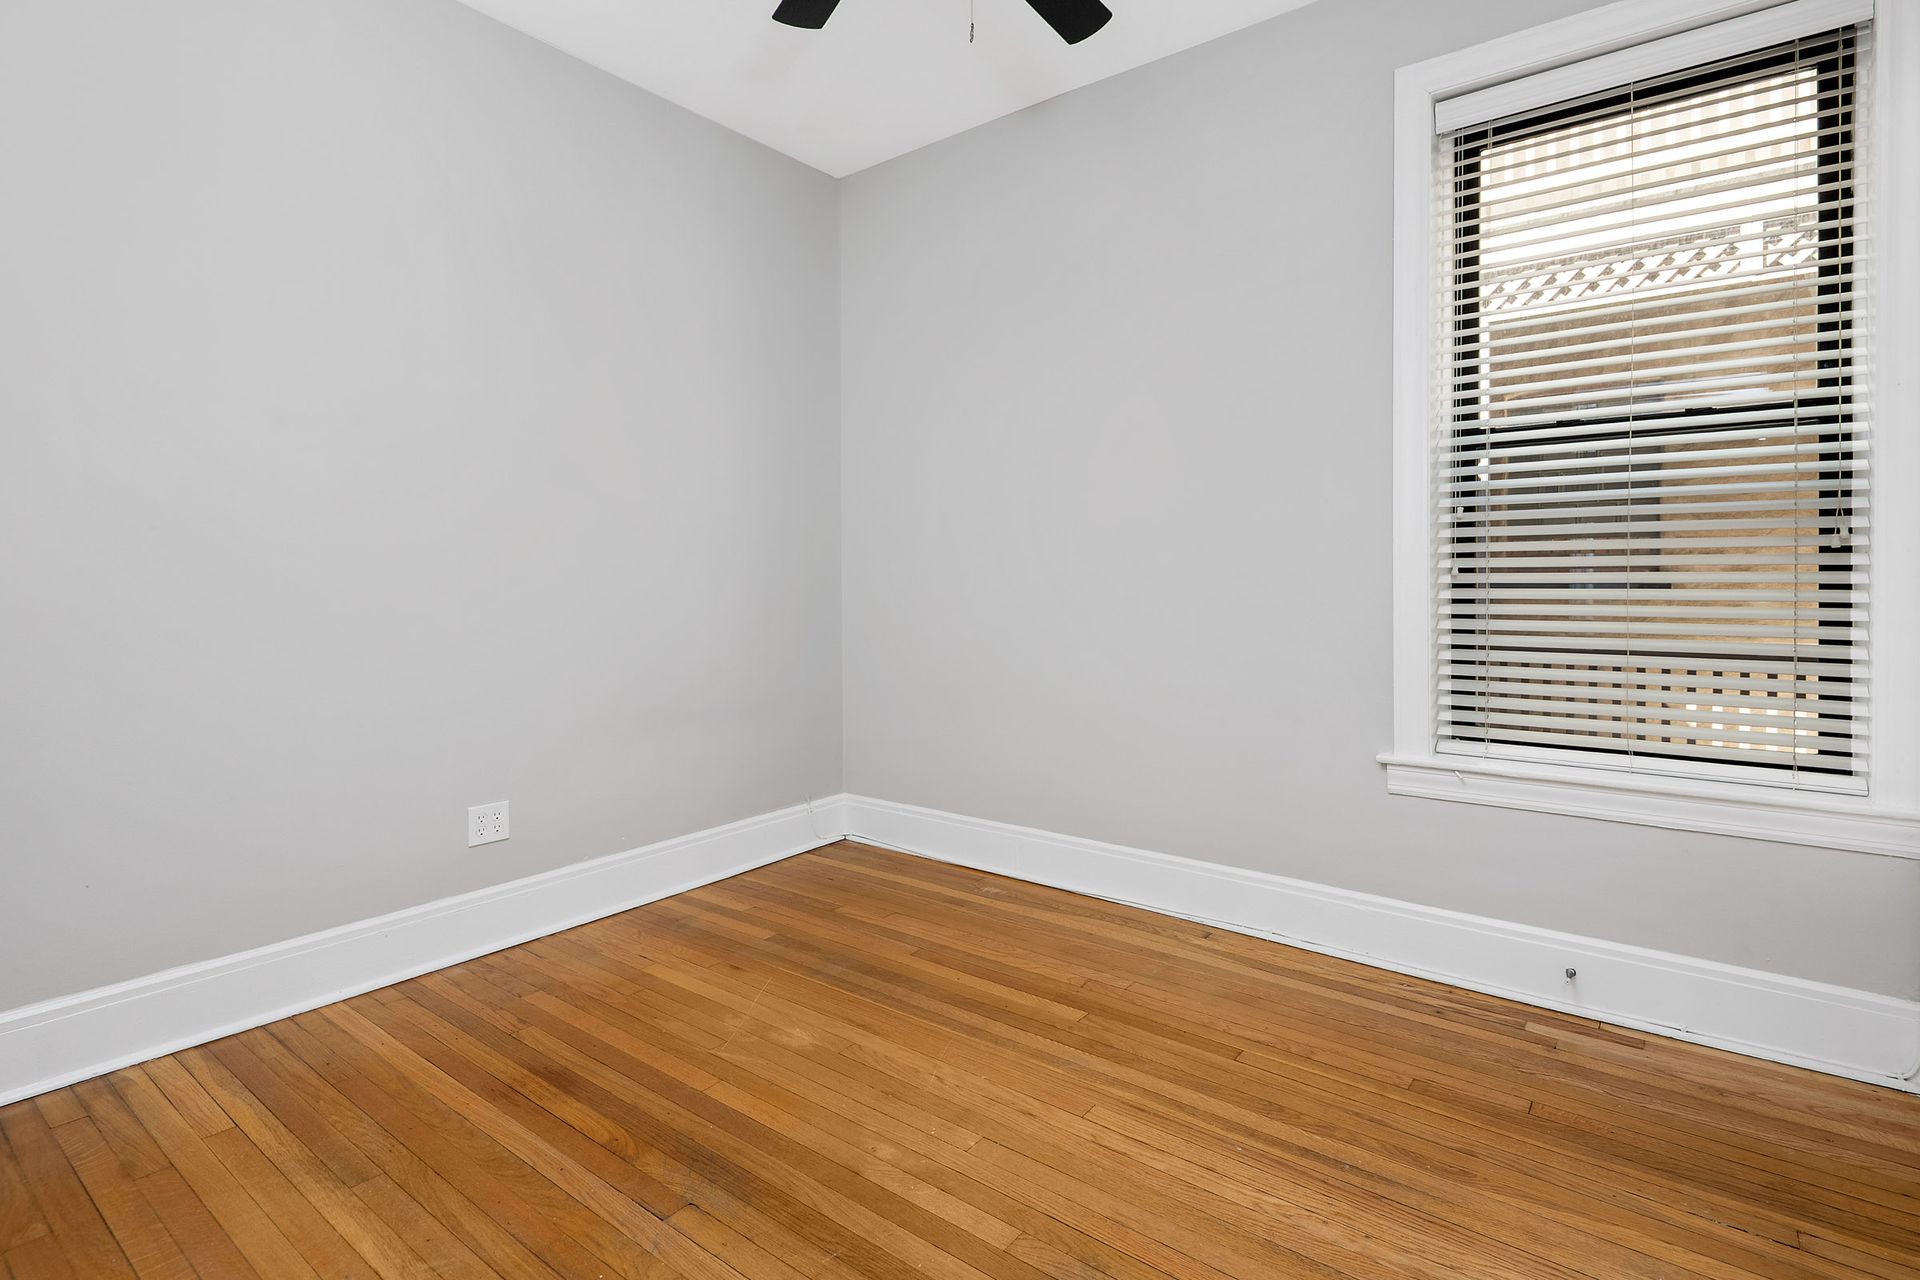 An empty room with hardwood floors and a window with blinds.